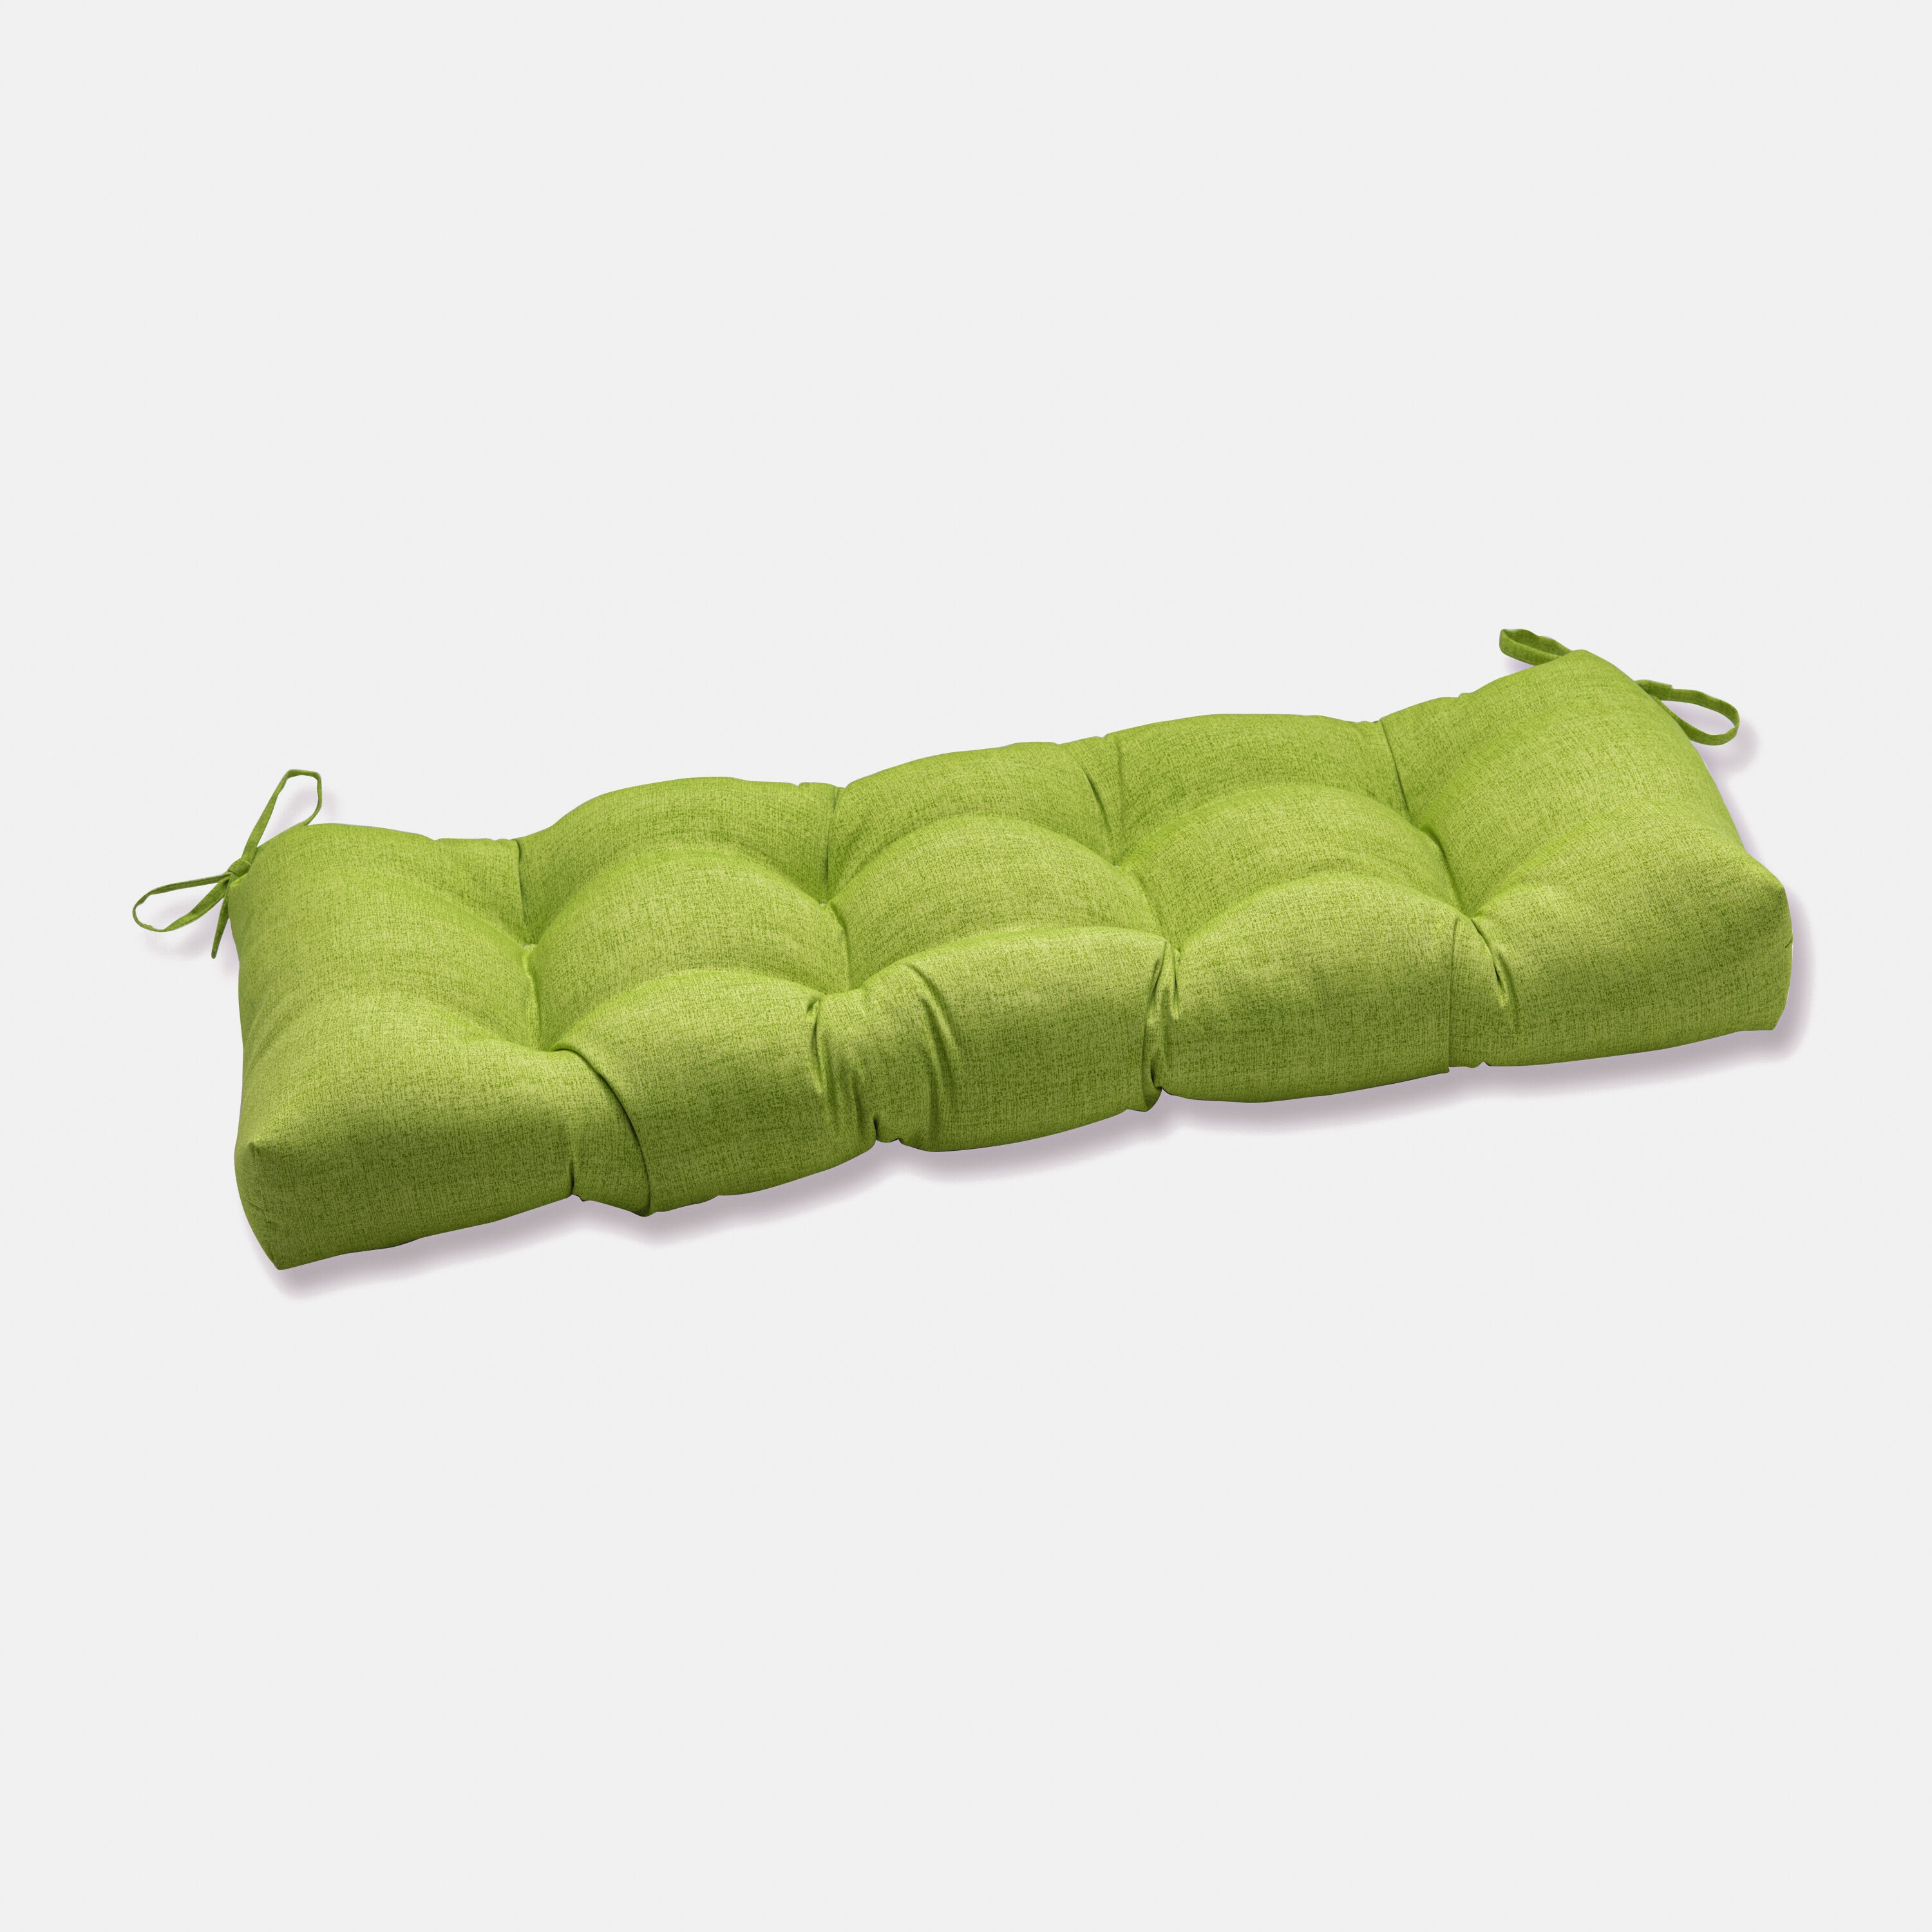 Tufted Outdoor Cushion for Bench, Swing, 5 Sizes, Aria Fiesta